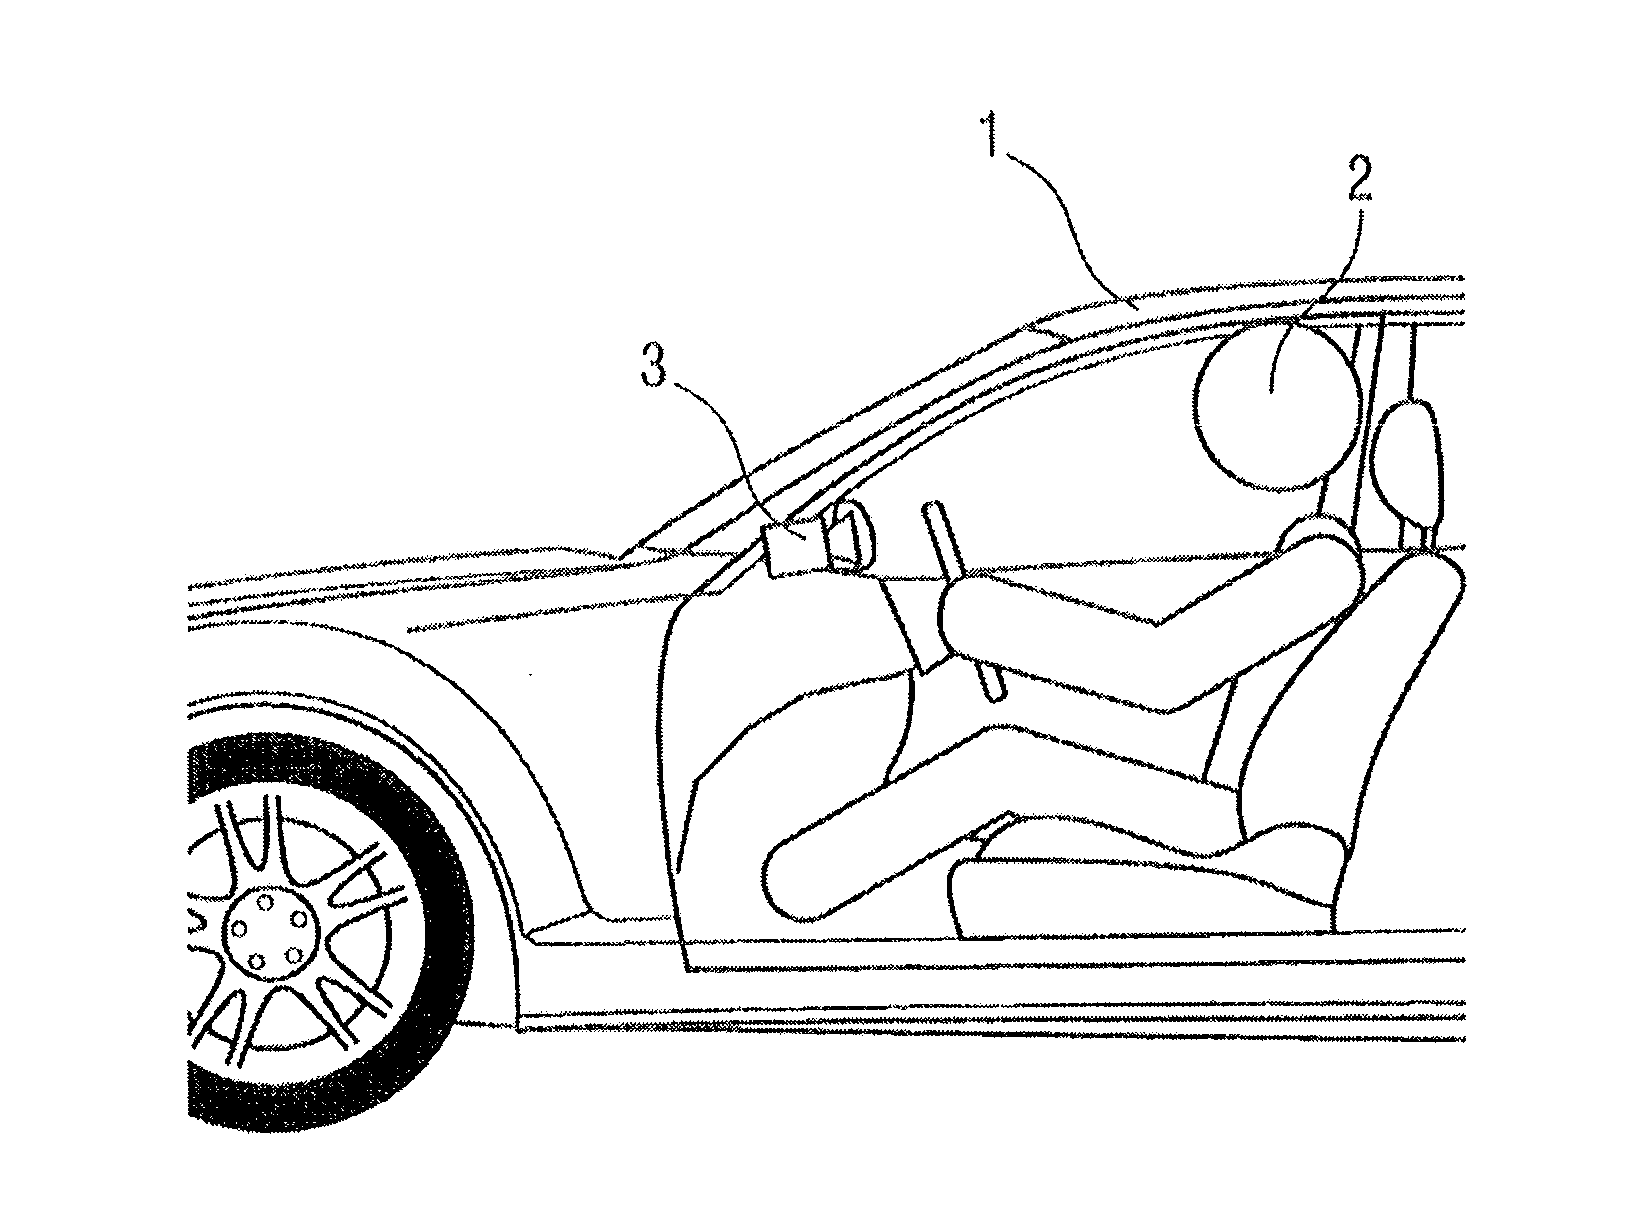 Method and Device for Monitoring at least one Vehicle Occupant, and Method for Operating at least one Assistance Device